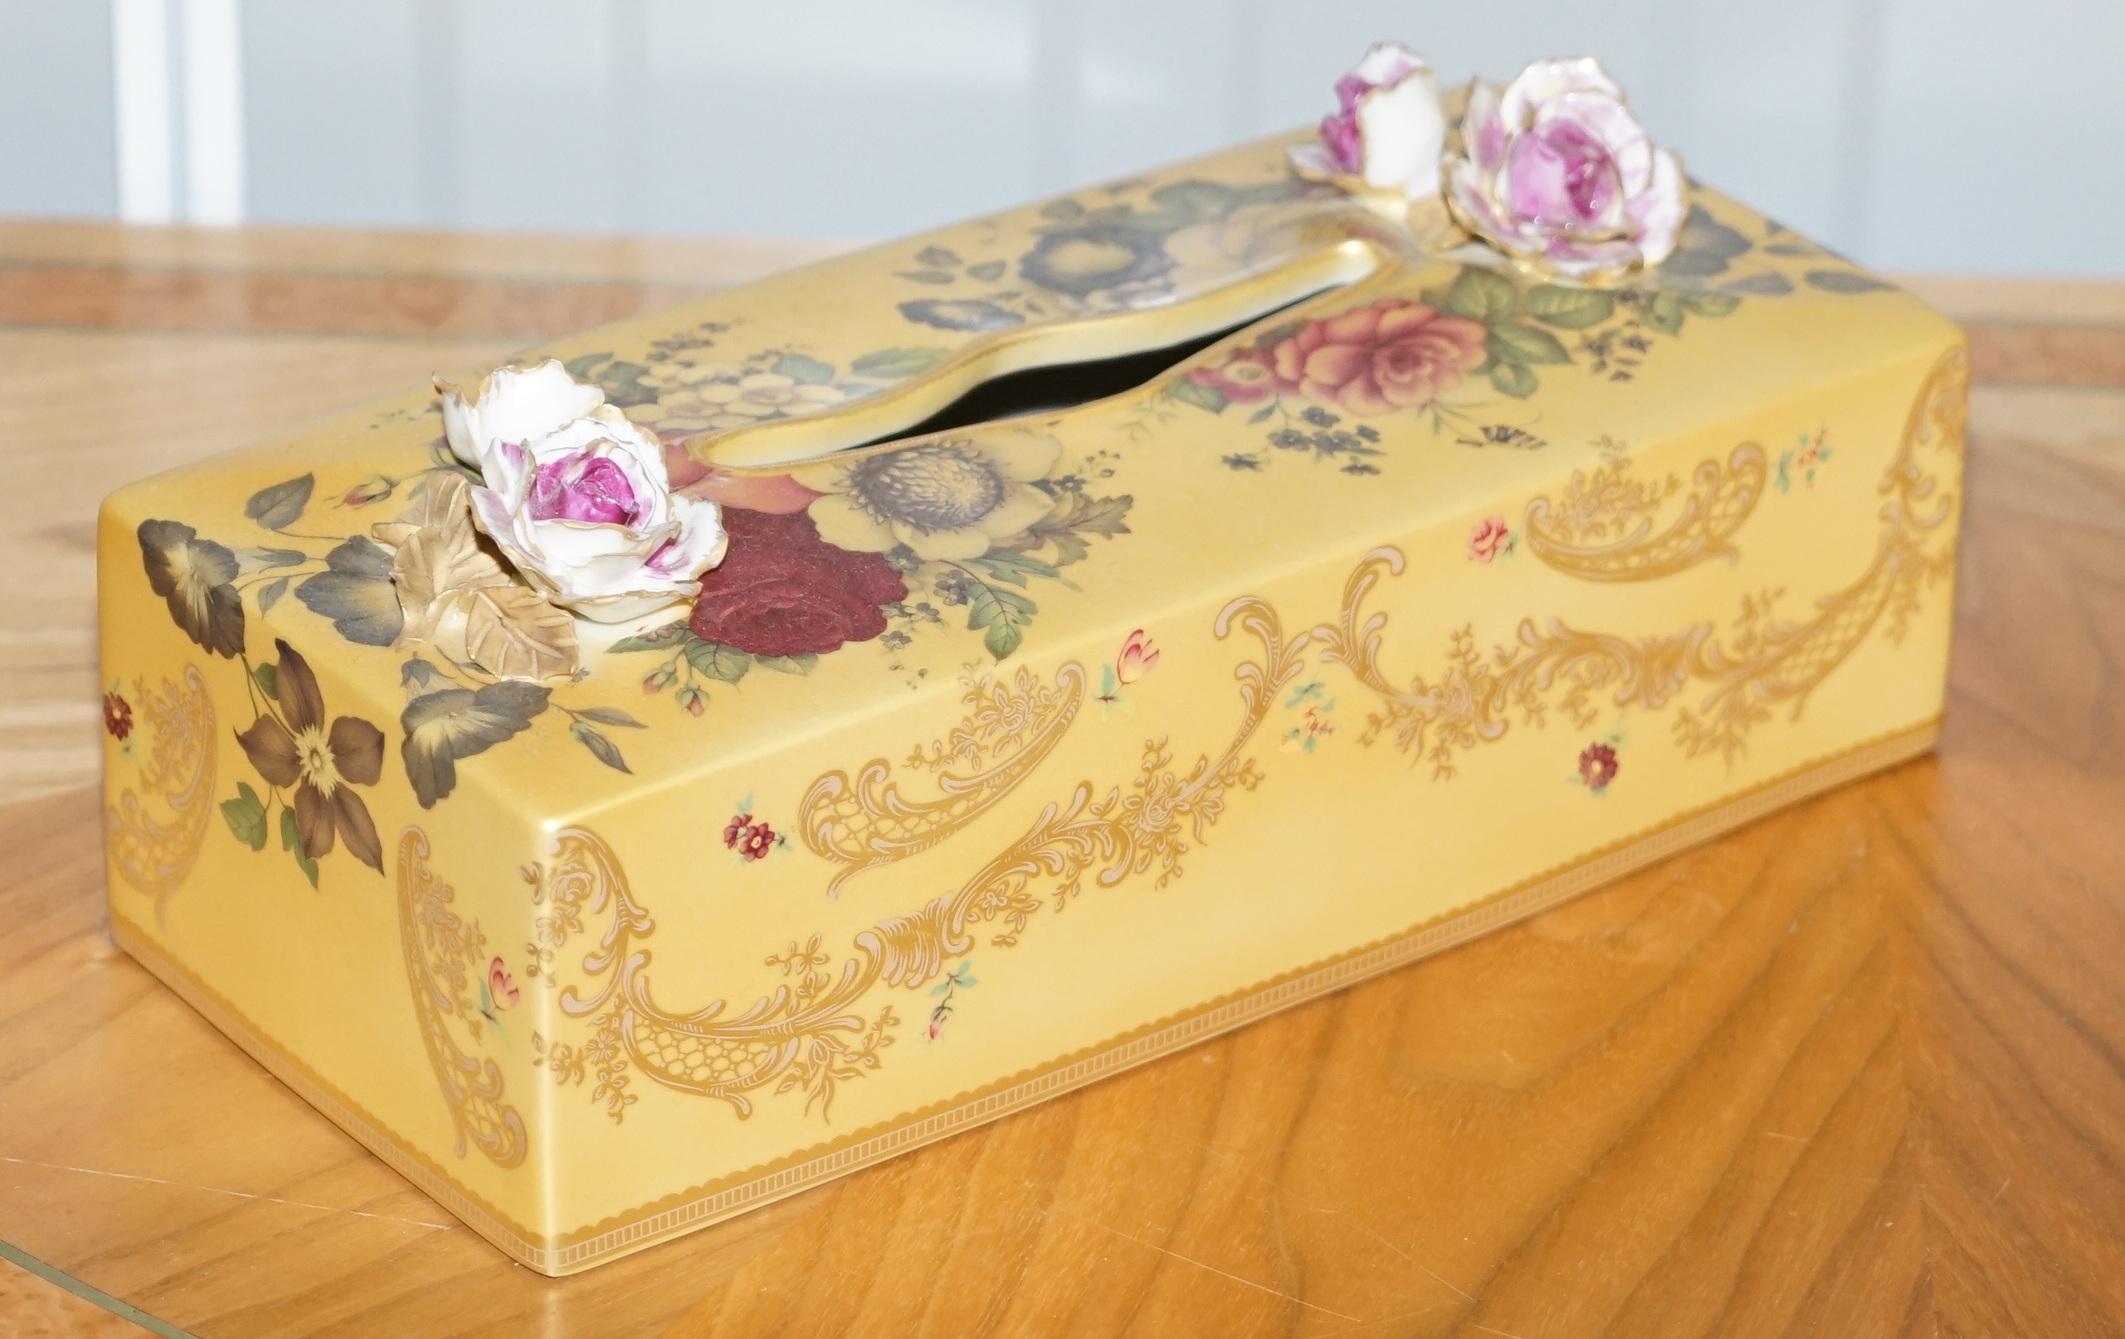 We are delighted to offer for sale this lovely pair of handmade in Italy, Artemest 1958 Porcelain tissue box covers hand painted by Mangani

A very decorative and well made pair, each one has the original price label inside of £386 each and one